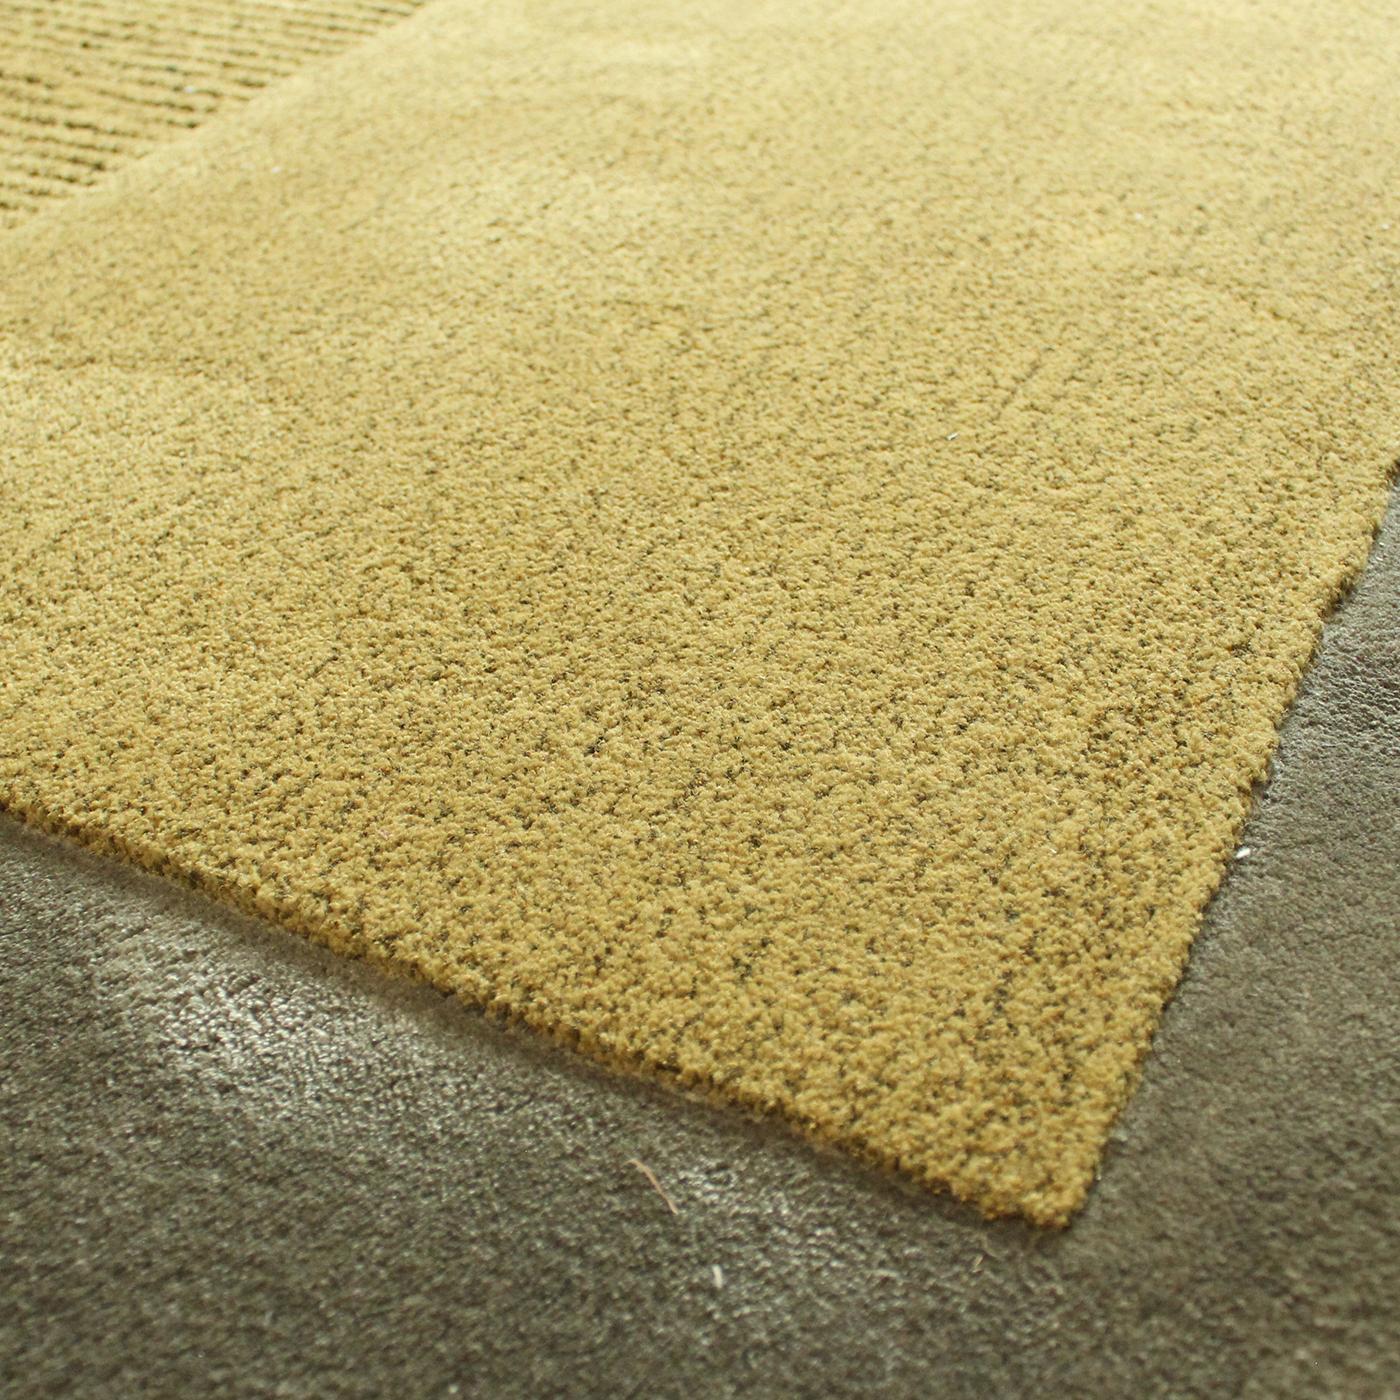 Warm greens, mustard yellow, and gray hues mix with bright yellow and red in this exquisite rug that combines an asymmetrical silhouette and a variety of textures obtained with the bouclè, velvet, relief, and shaggy techniques. The result is a